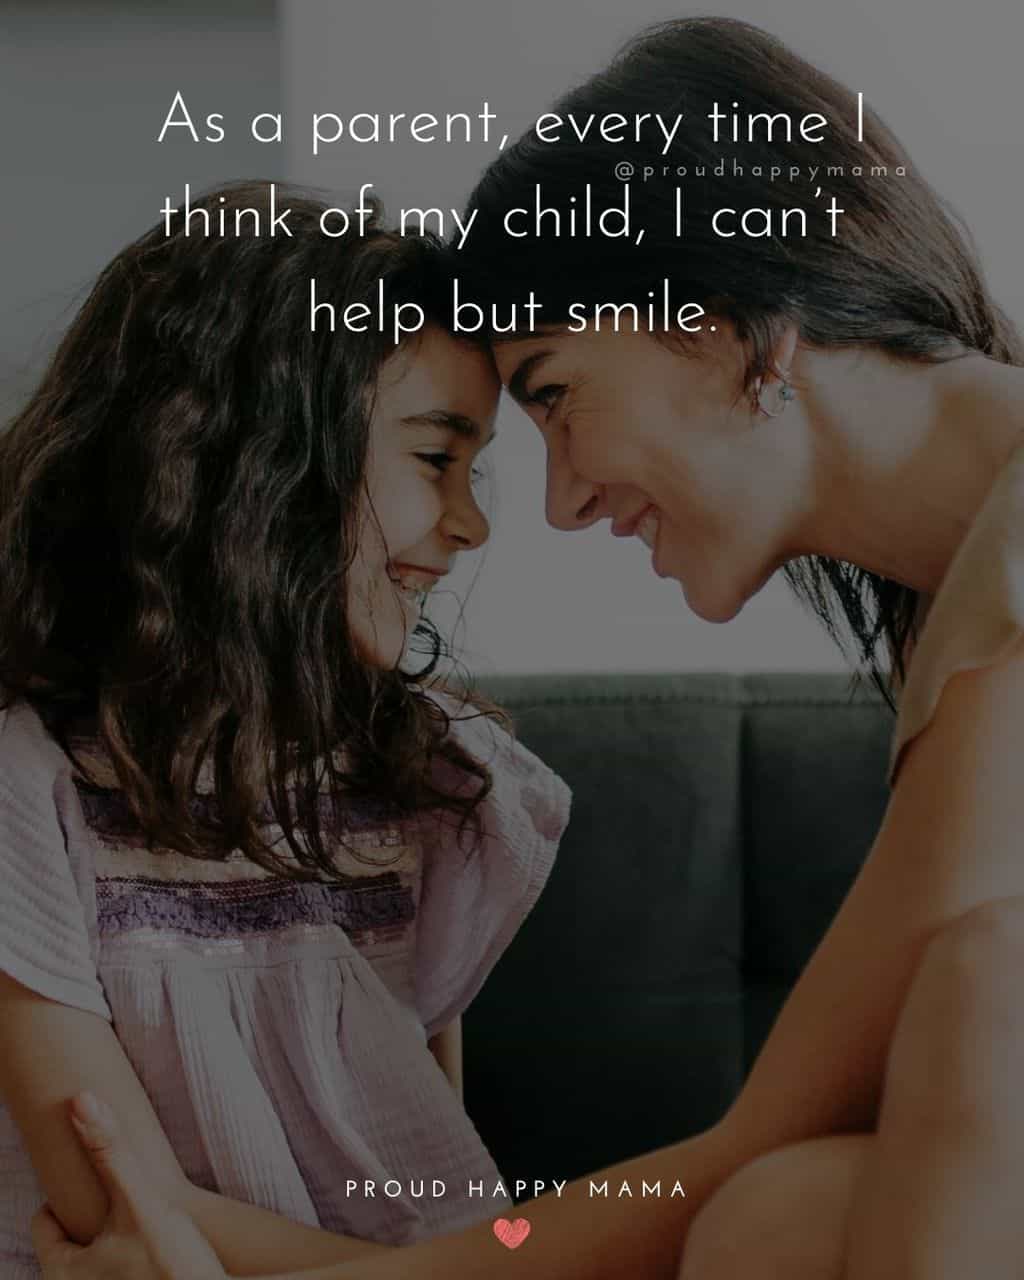 Parenting Quotes - As a parent, every time I think of my child, I can’t help but smile.’